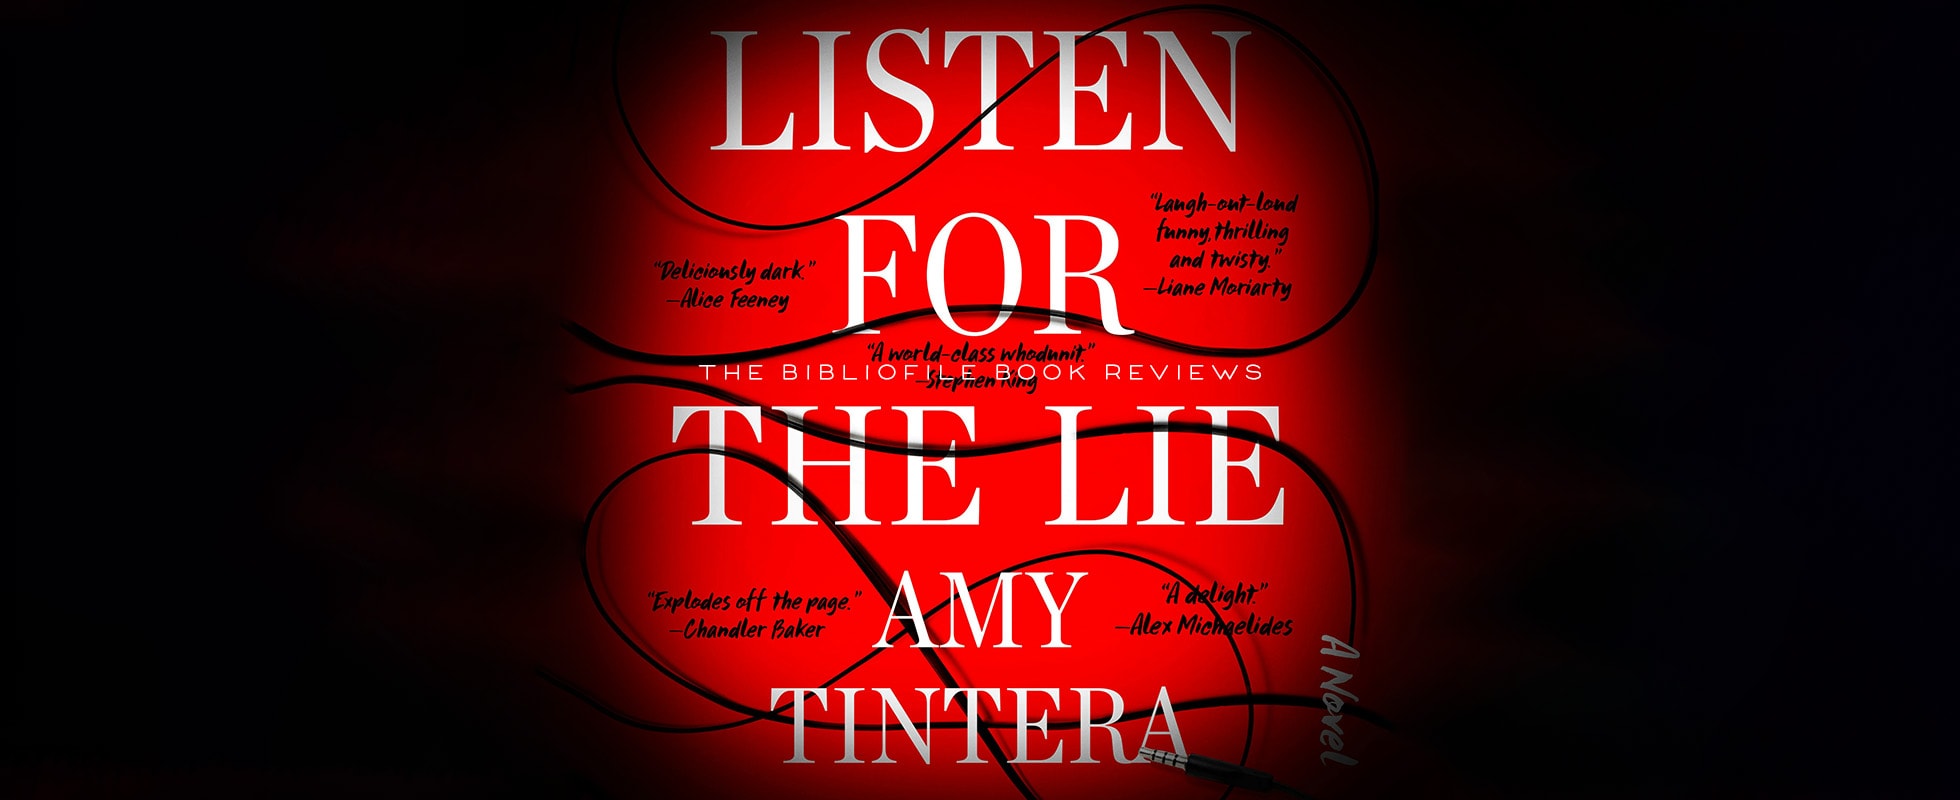 listen for the lie by amy tintera - book review, summary, plot recap, spoilers